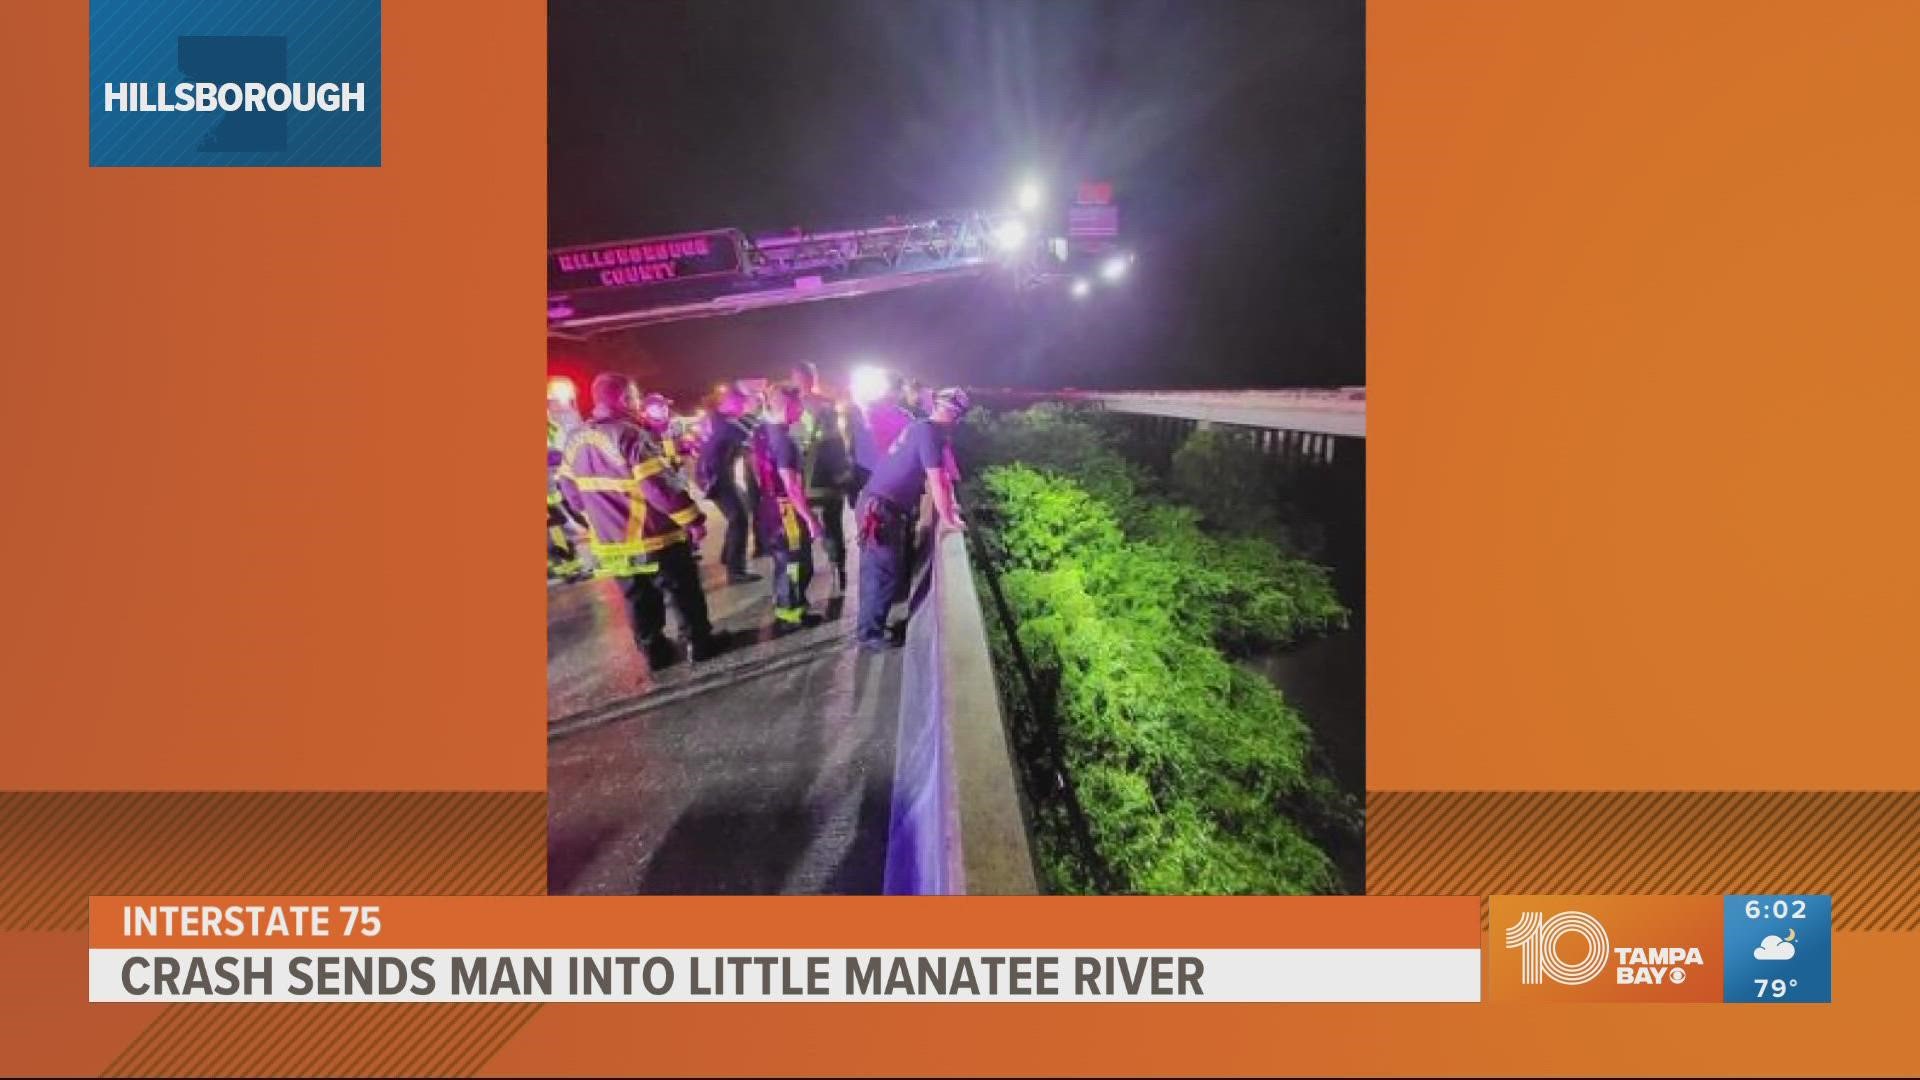 He was able to swim safely to the river's bank and was taken to the hospital in 'stable' condition, Hillsborough County Fire Rescue said.